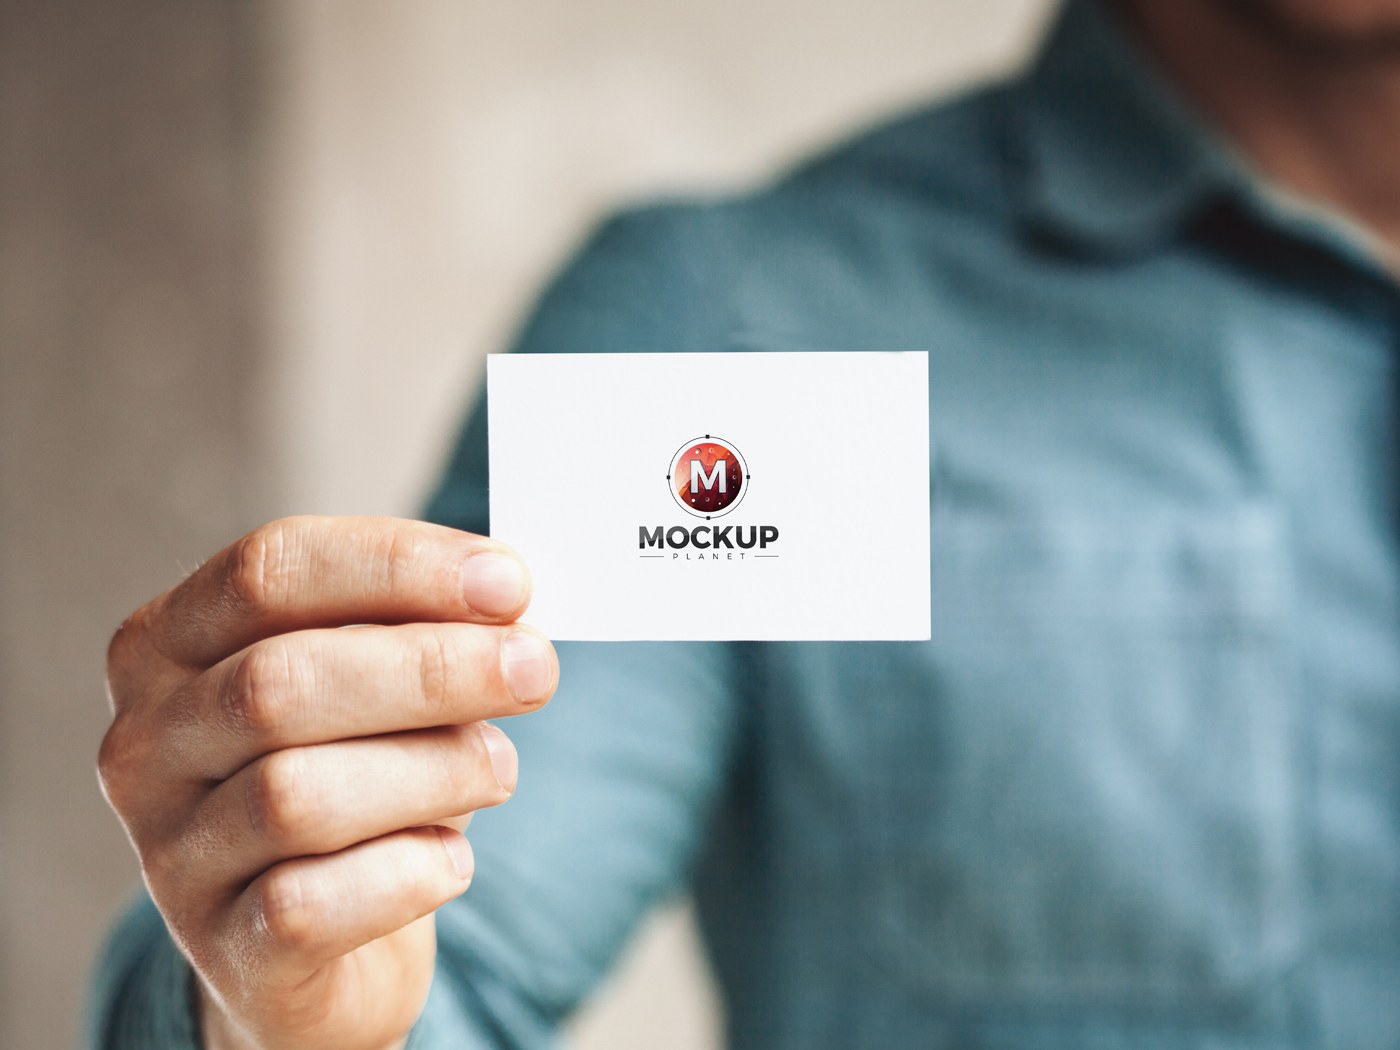 Free-Man-Holding-in-Hand-Business-Card-Mockup-PSD-For-Presentation